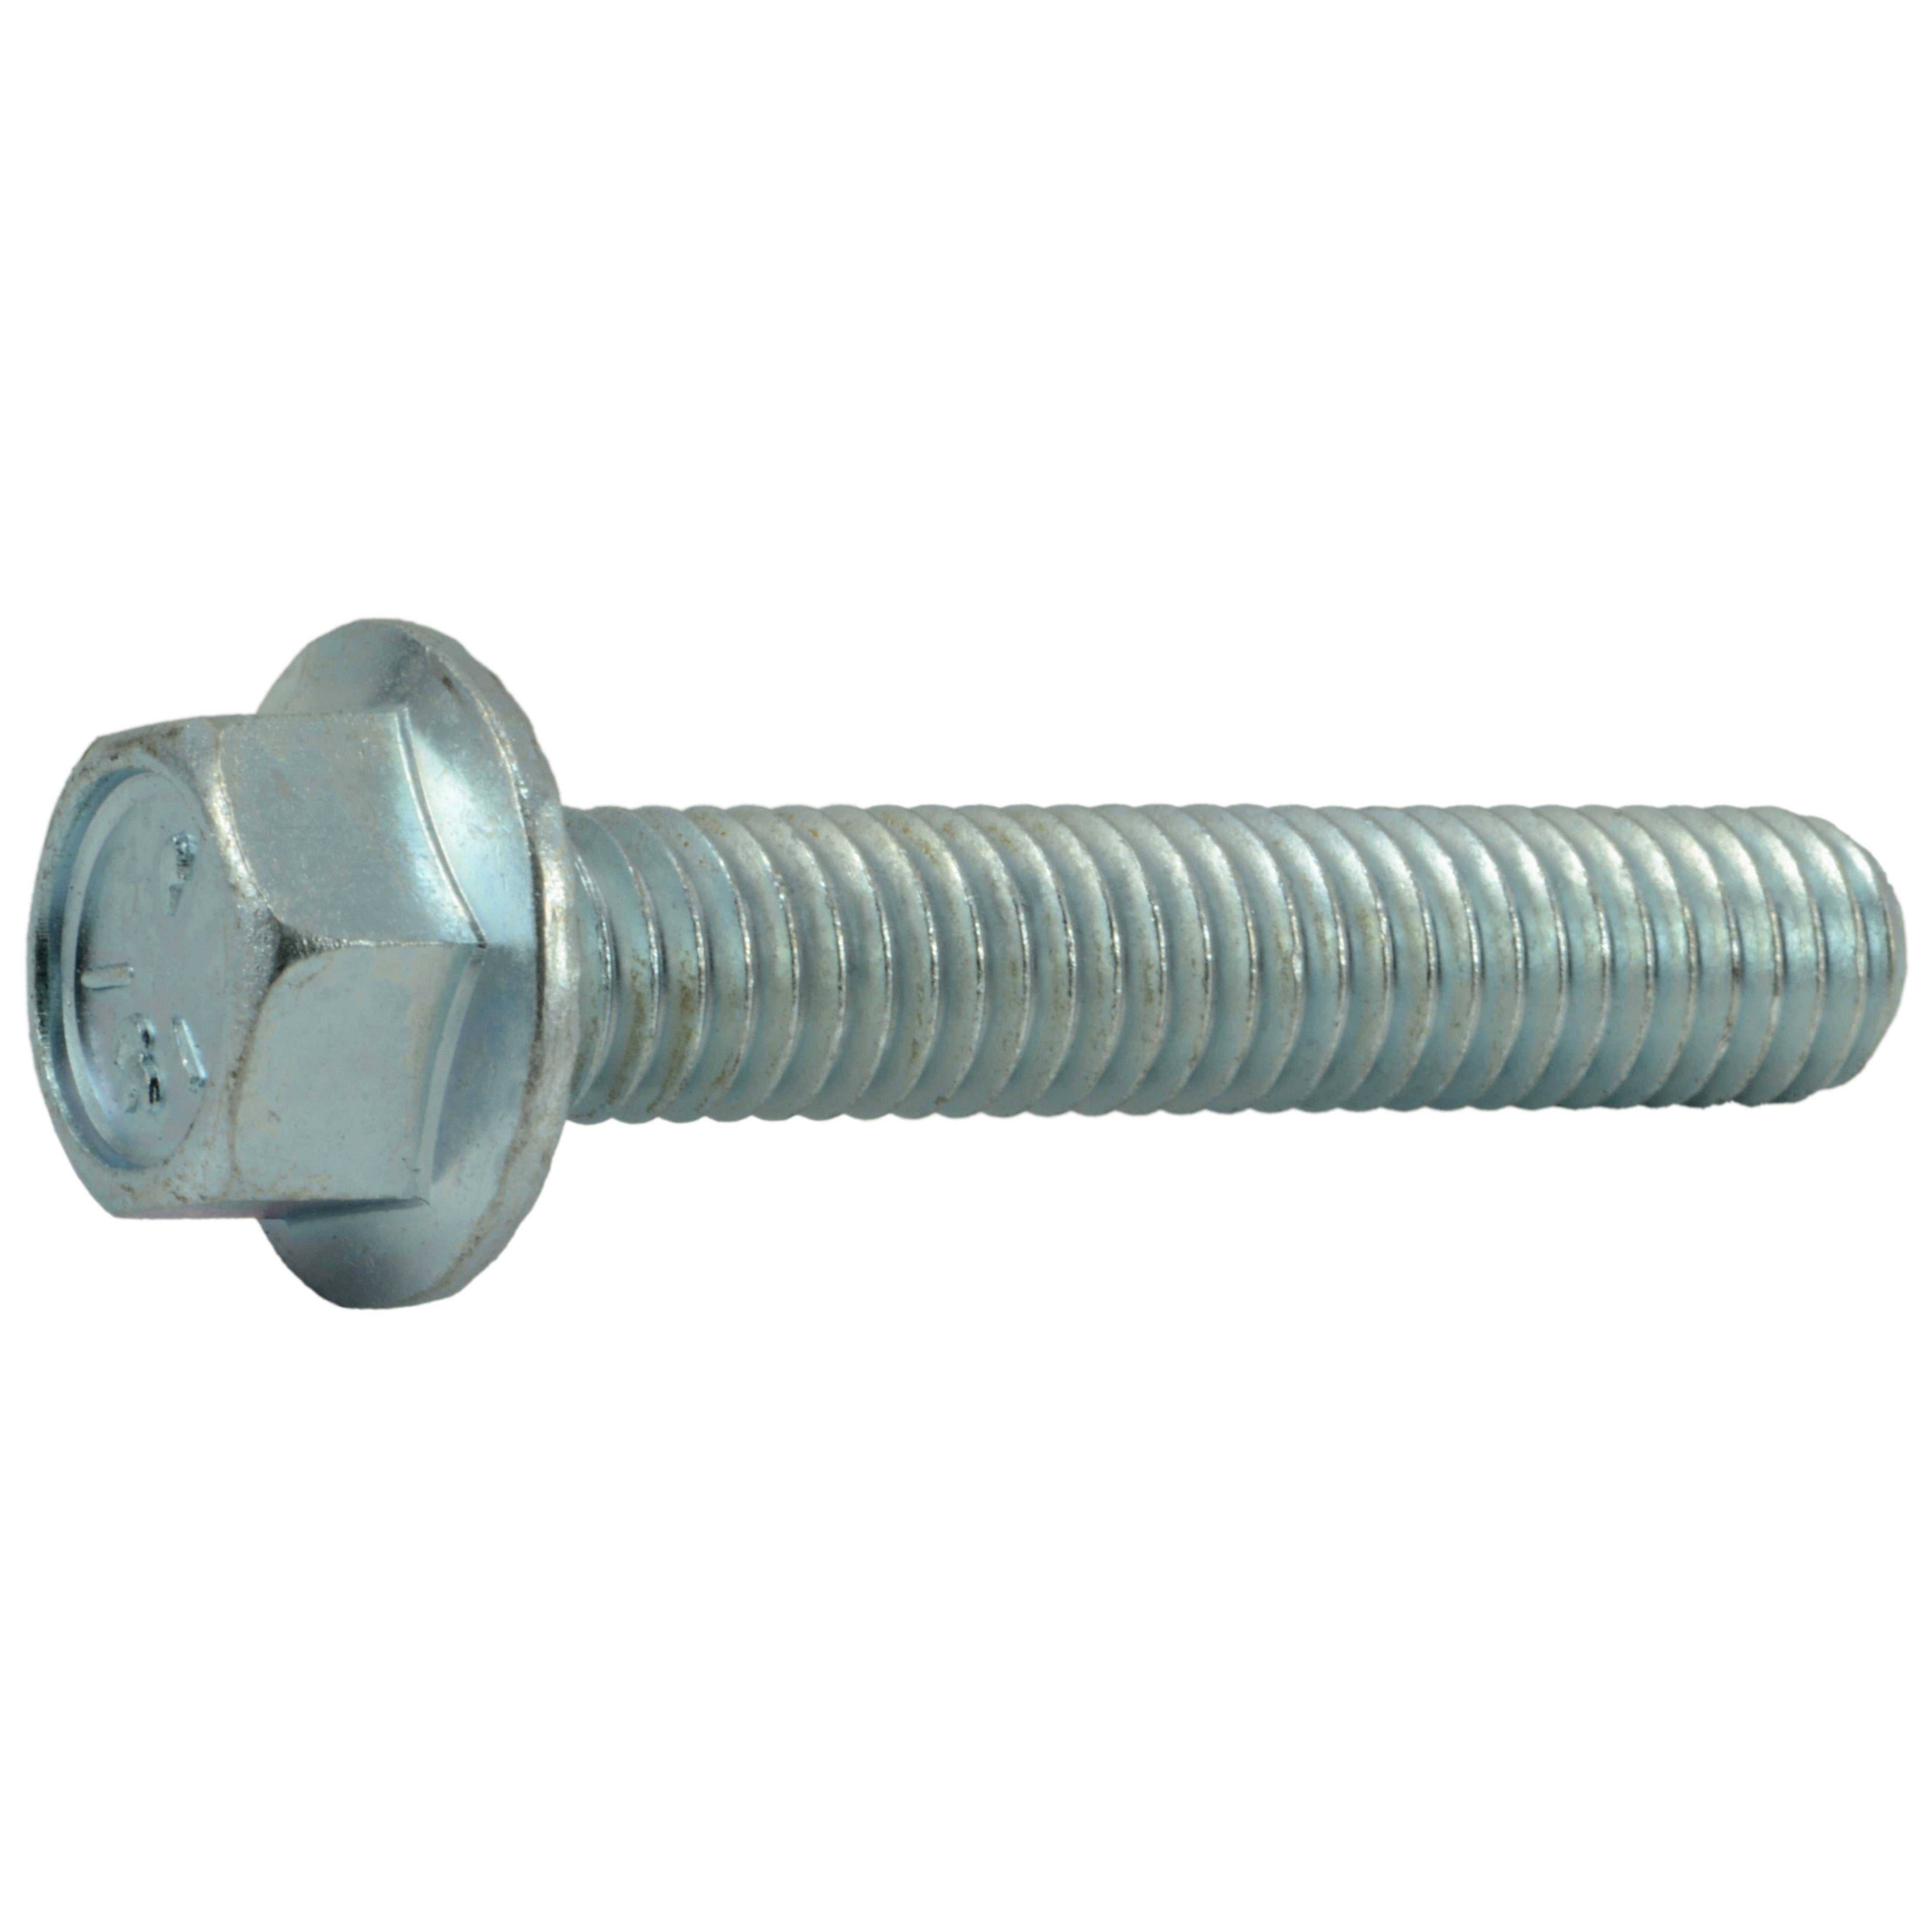 50 3/8-16x1/2 STAINLESS STEEL Serrated Hex Flange Screws Flange Bolts 